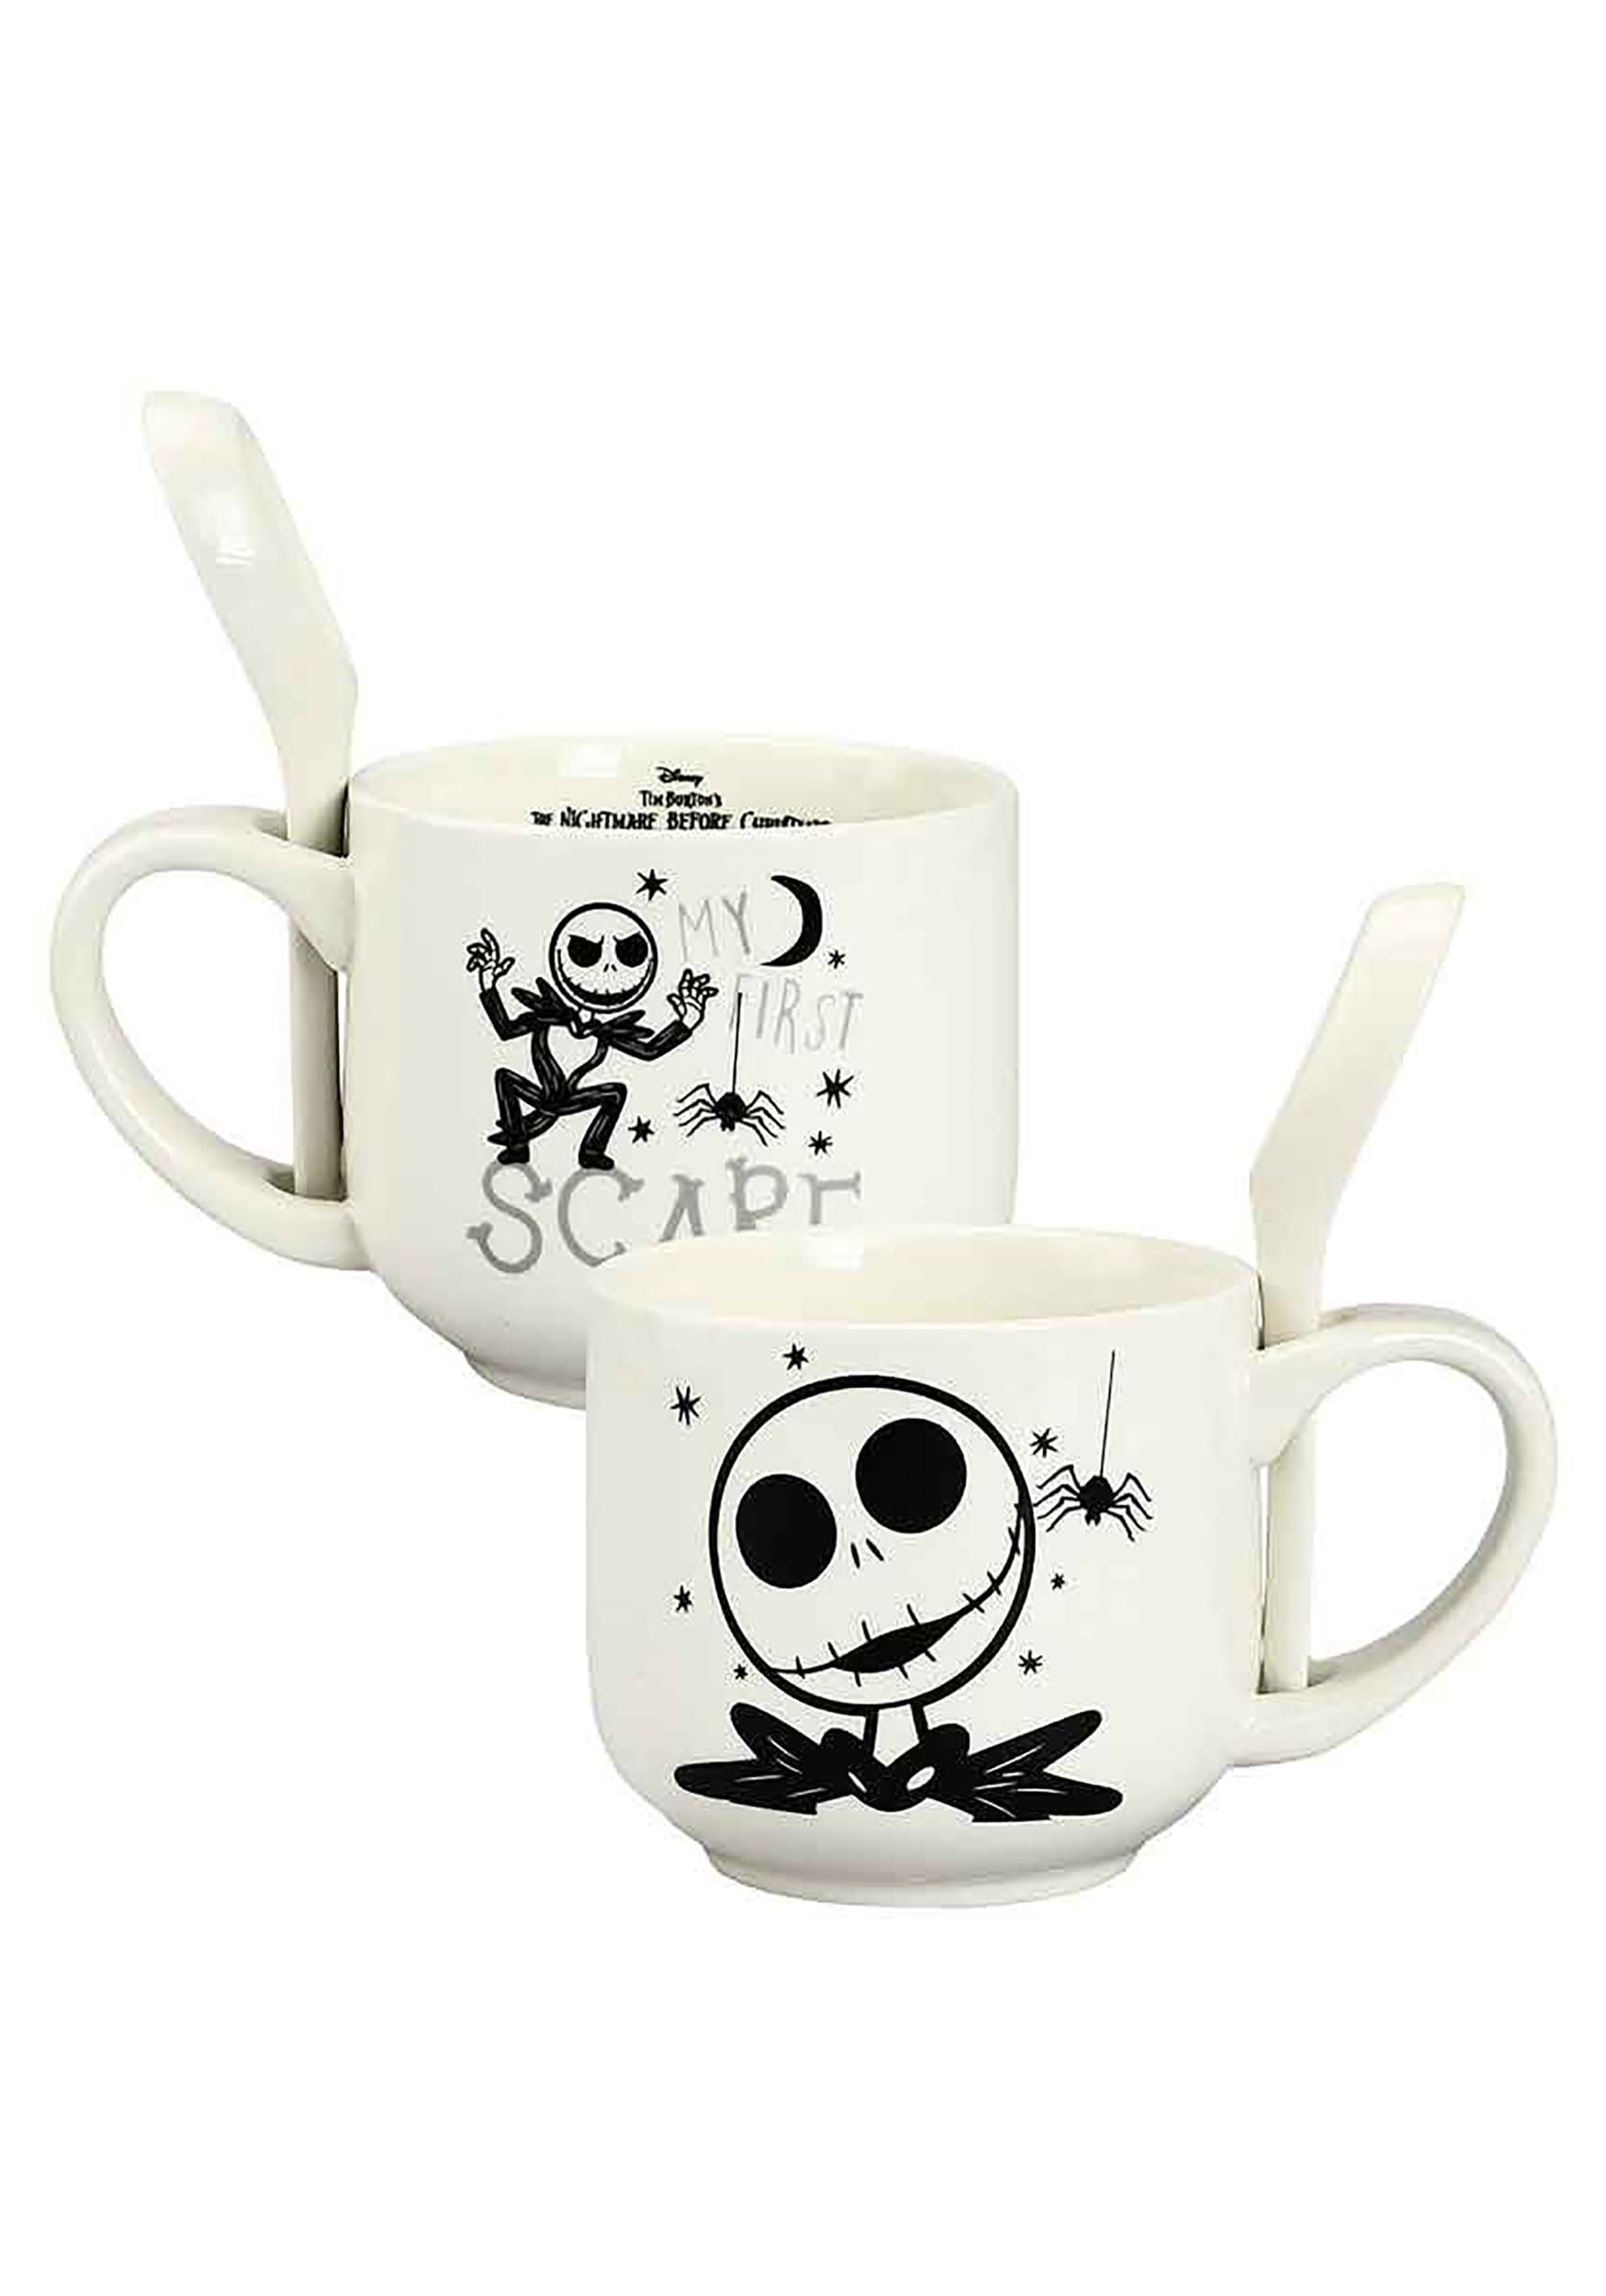 https://images.fun.com/products/79287/1-1/the-nightmare-before-christmas-jack-ceramic-soup-m.jpg